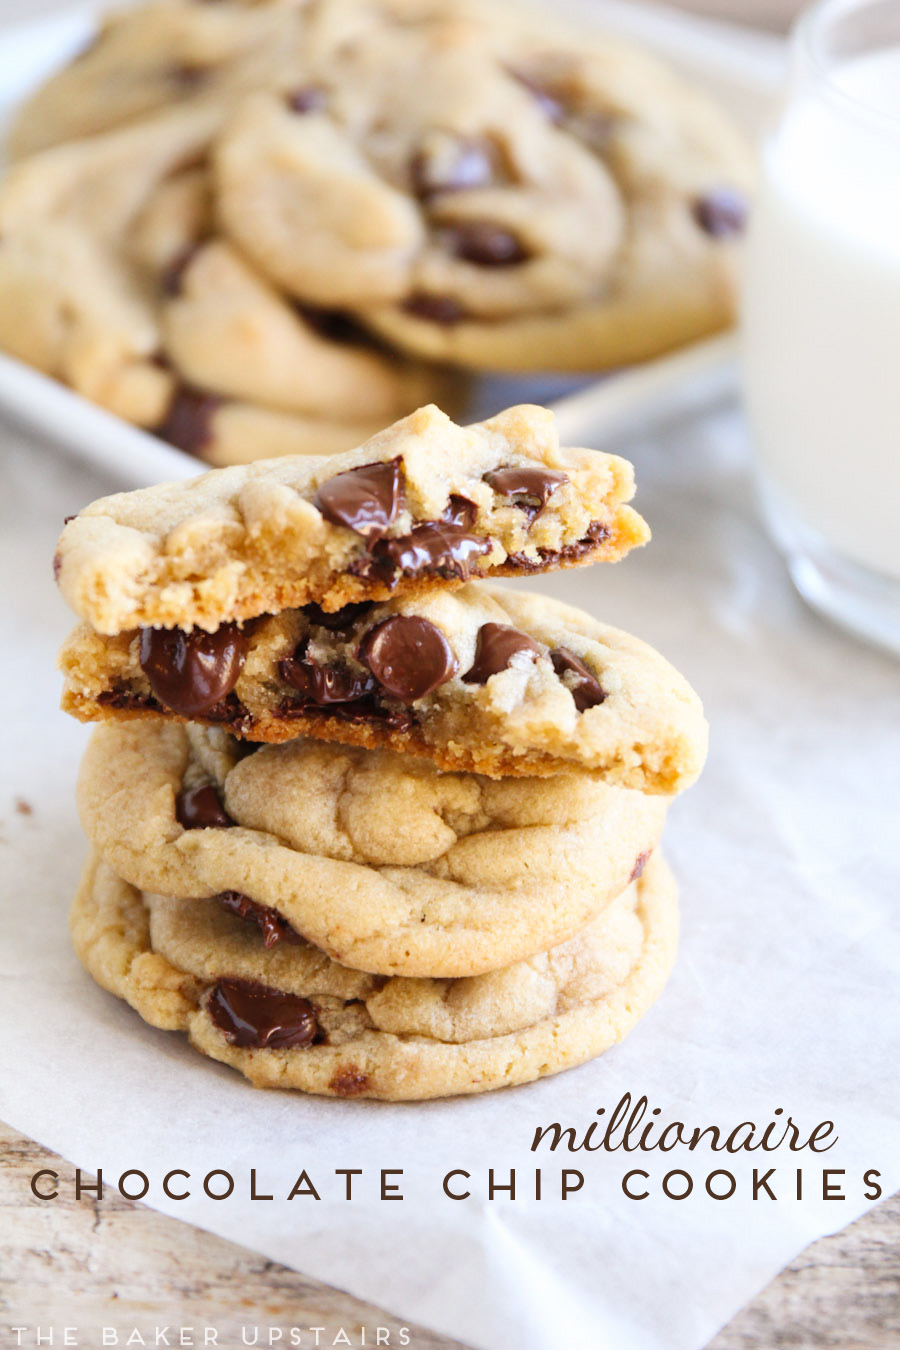 These millionaire chocolate chip cookies are so rich and indulgent, and over the top delicious!